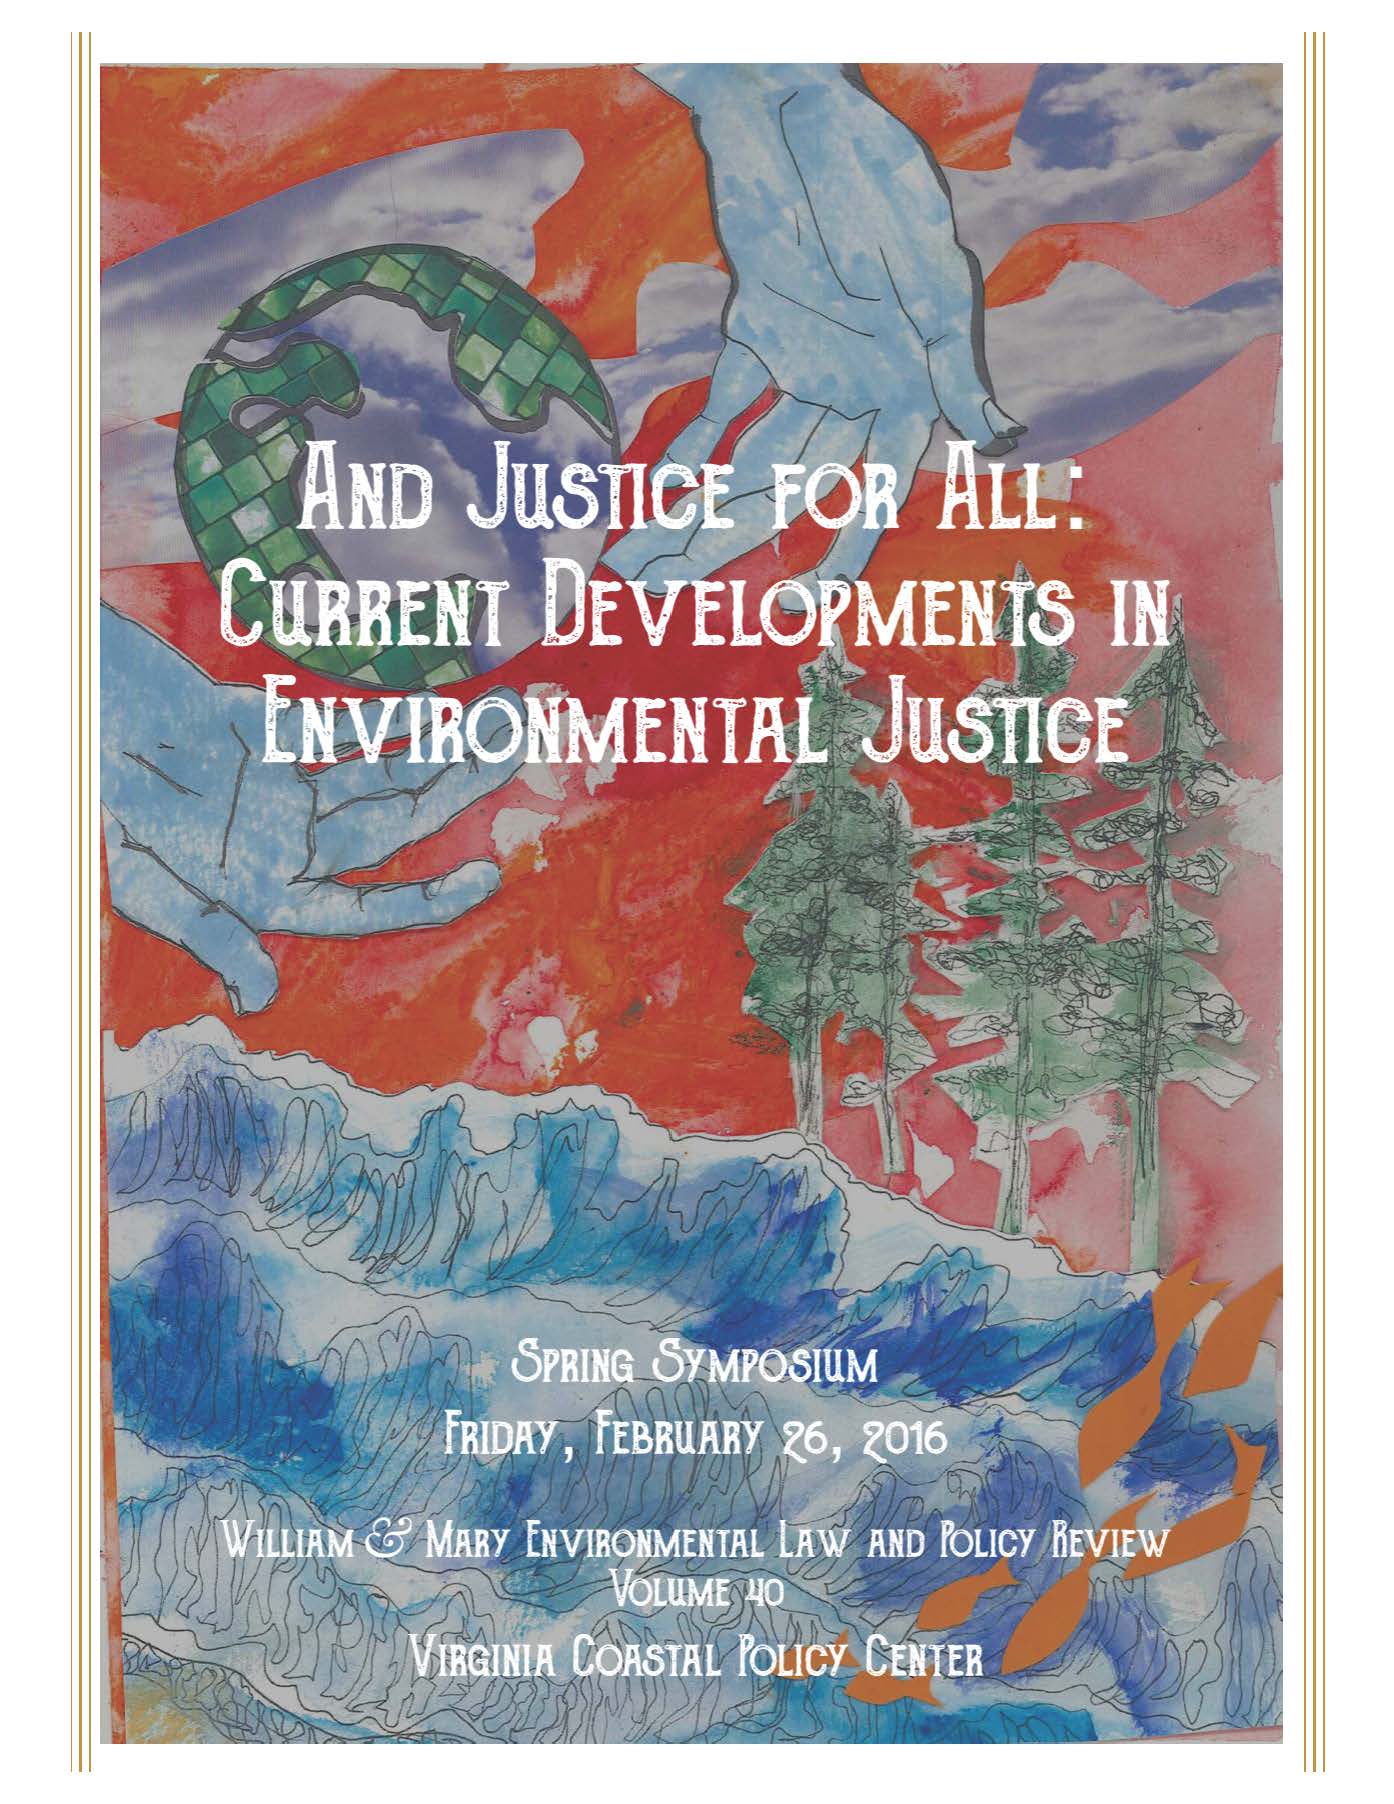 2016: And Justice for All: Current Developments in Environmental Justice